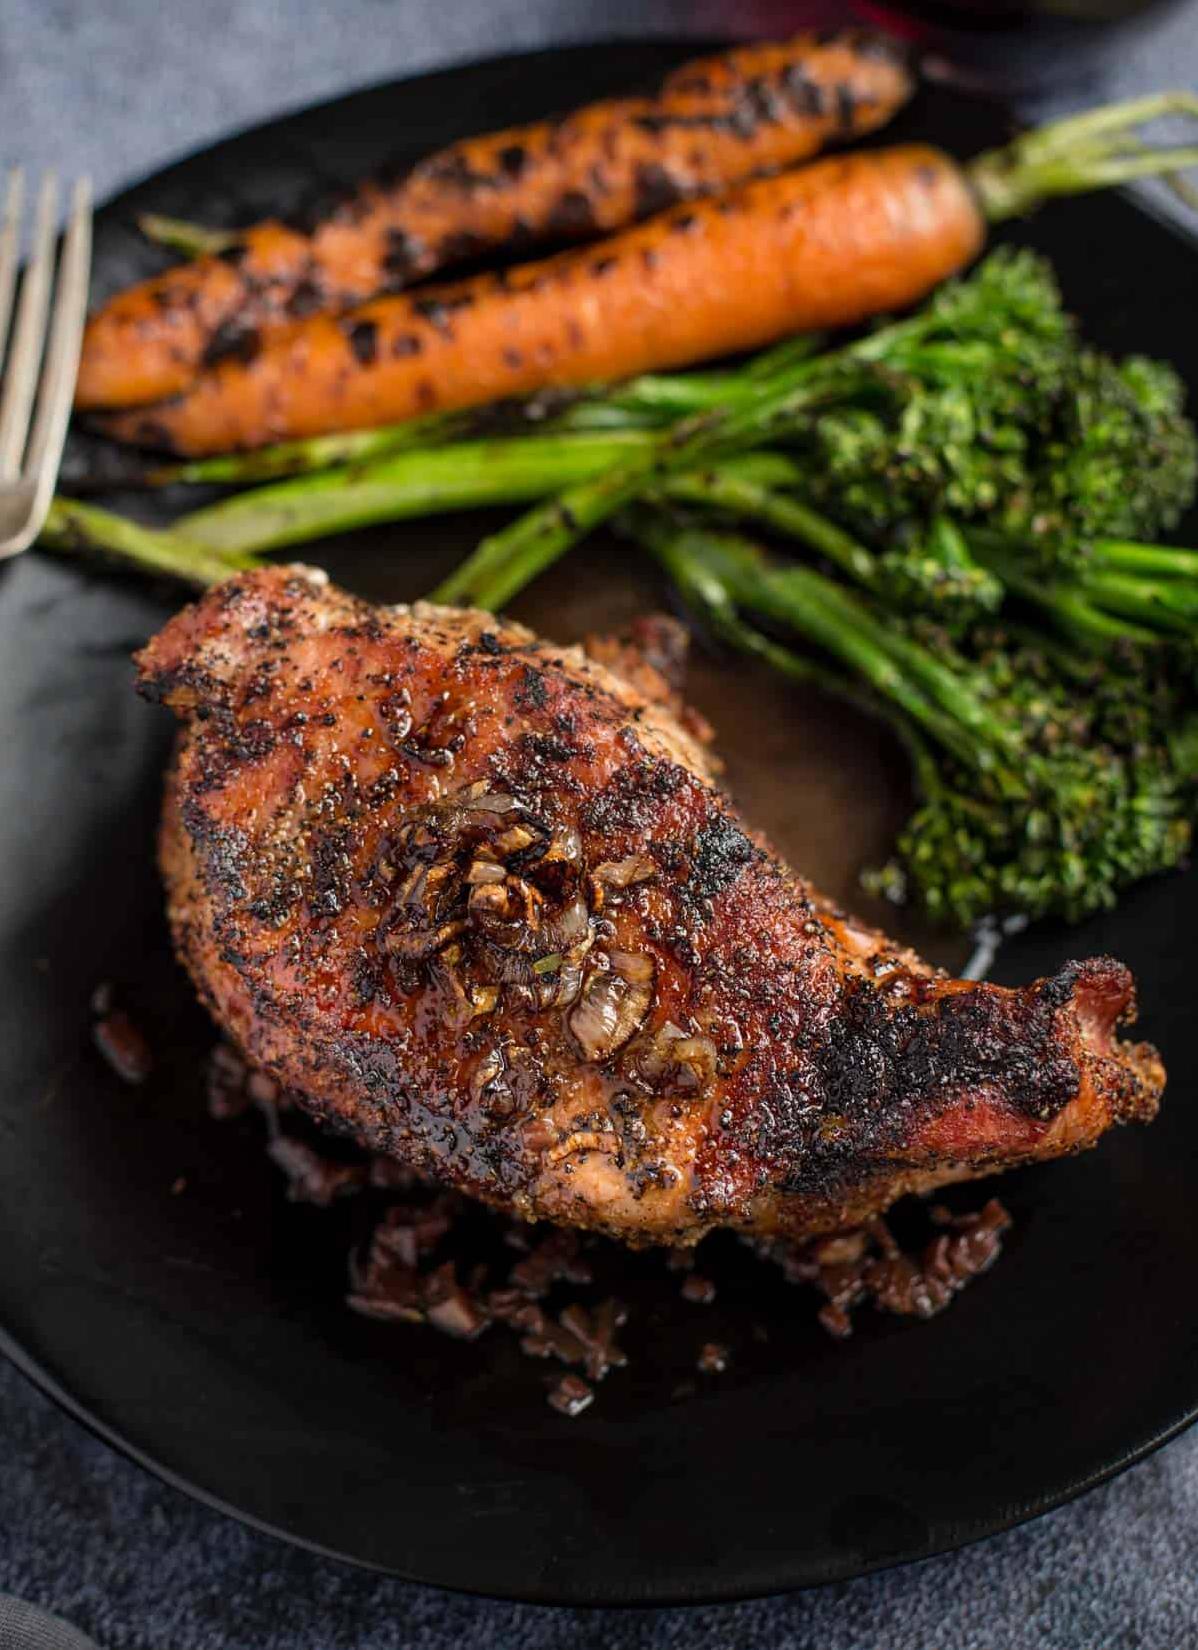  Sizzling pork chops loaded with the goodness of red wine